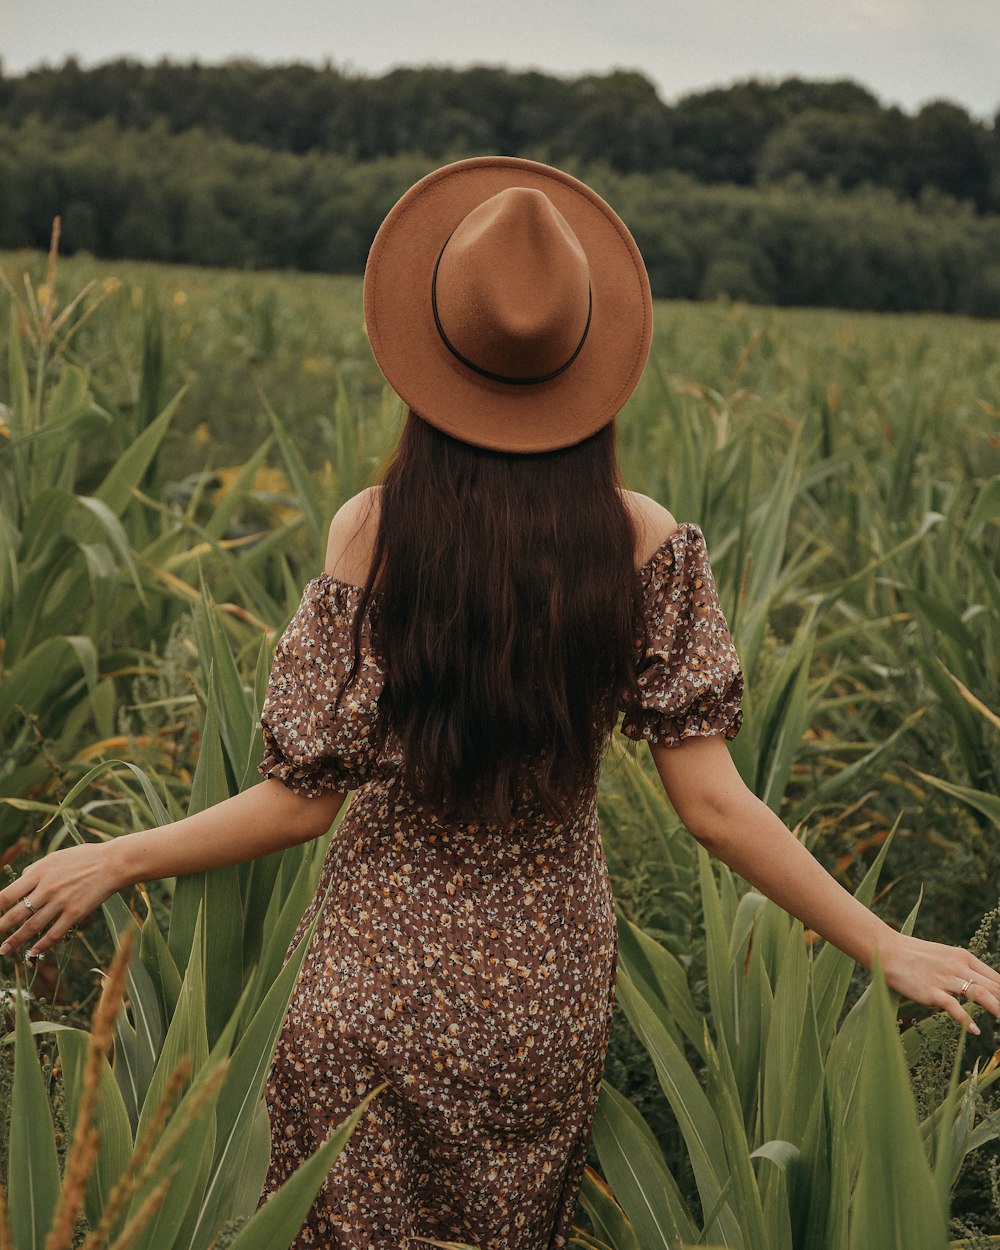 a woman wearing a brown hat standing in a field